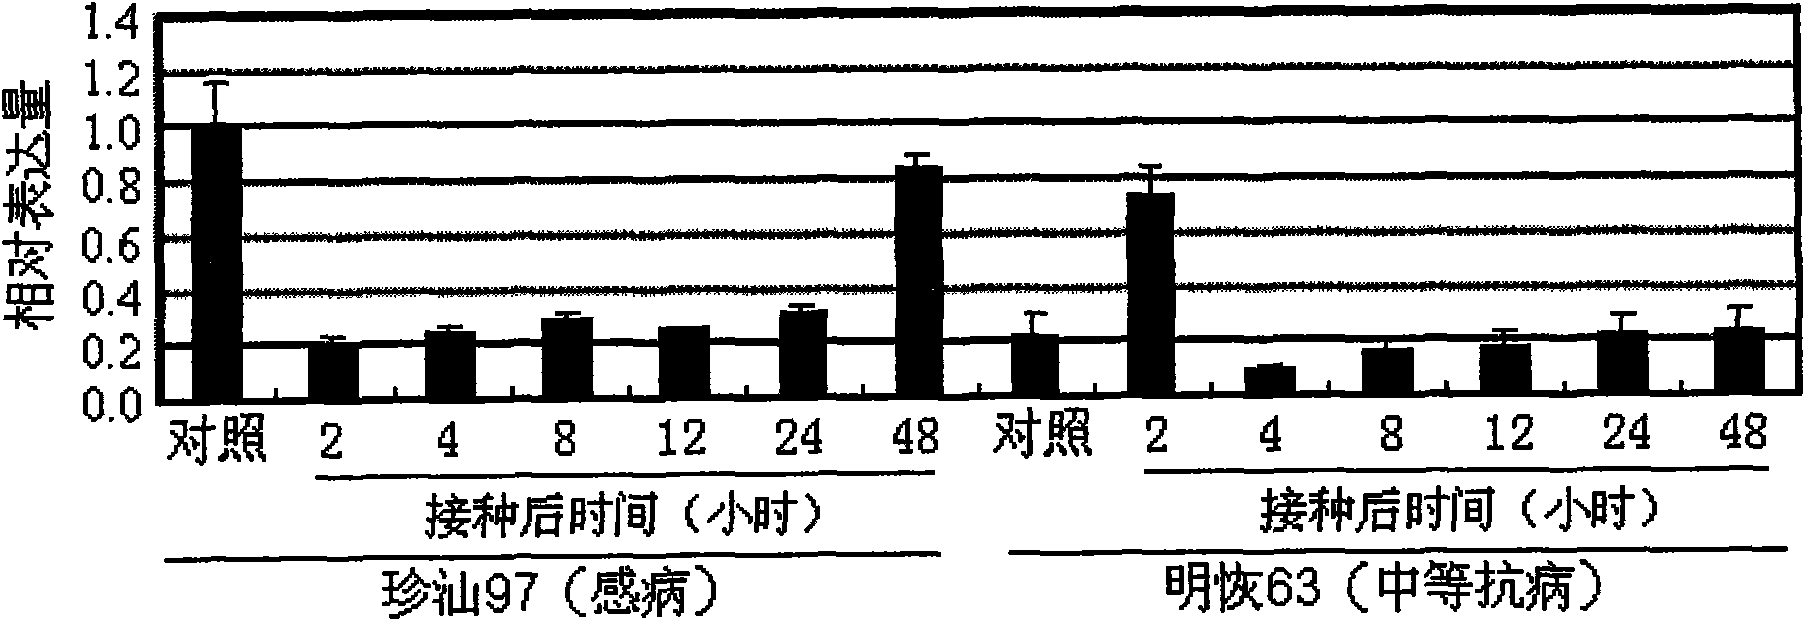 Rice disease resistance related gene GH3-2 and application thereof in breeding of broad spectrum disease-resistant rice